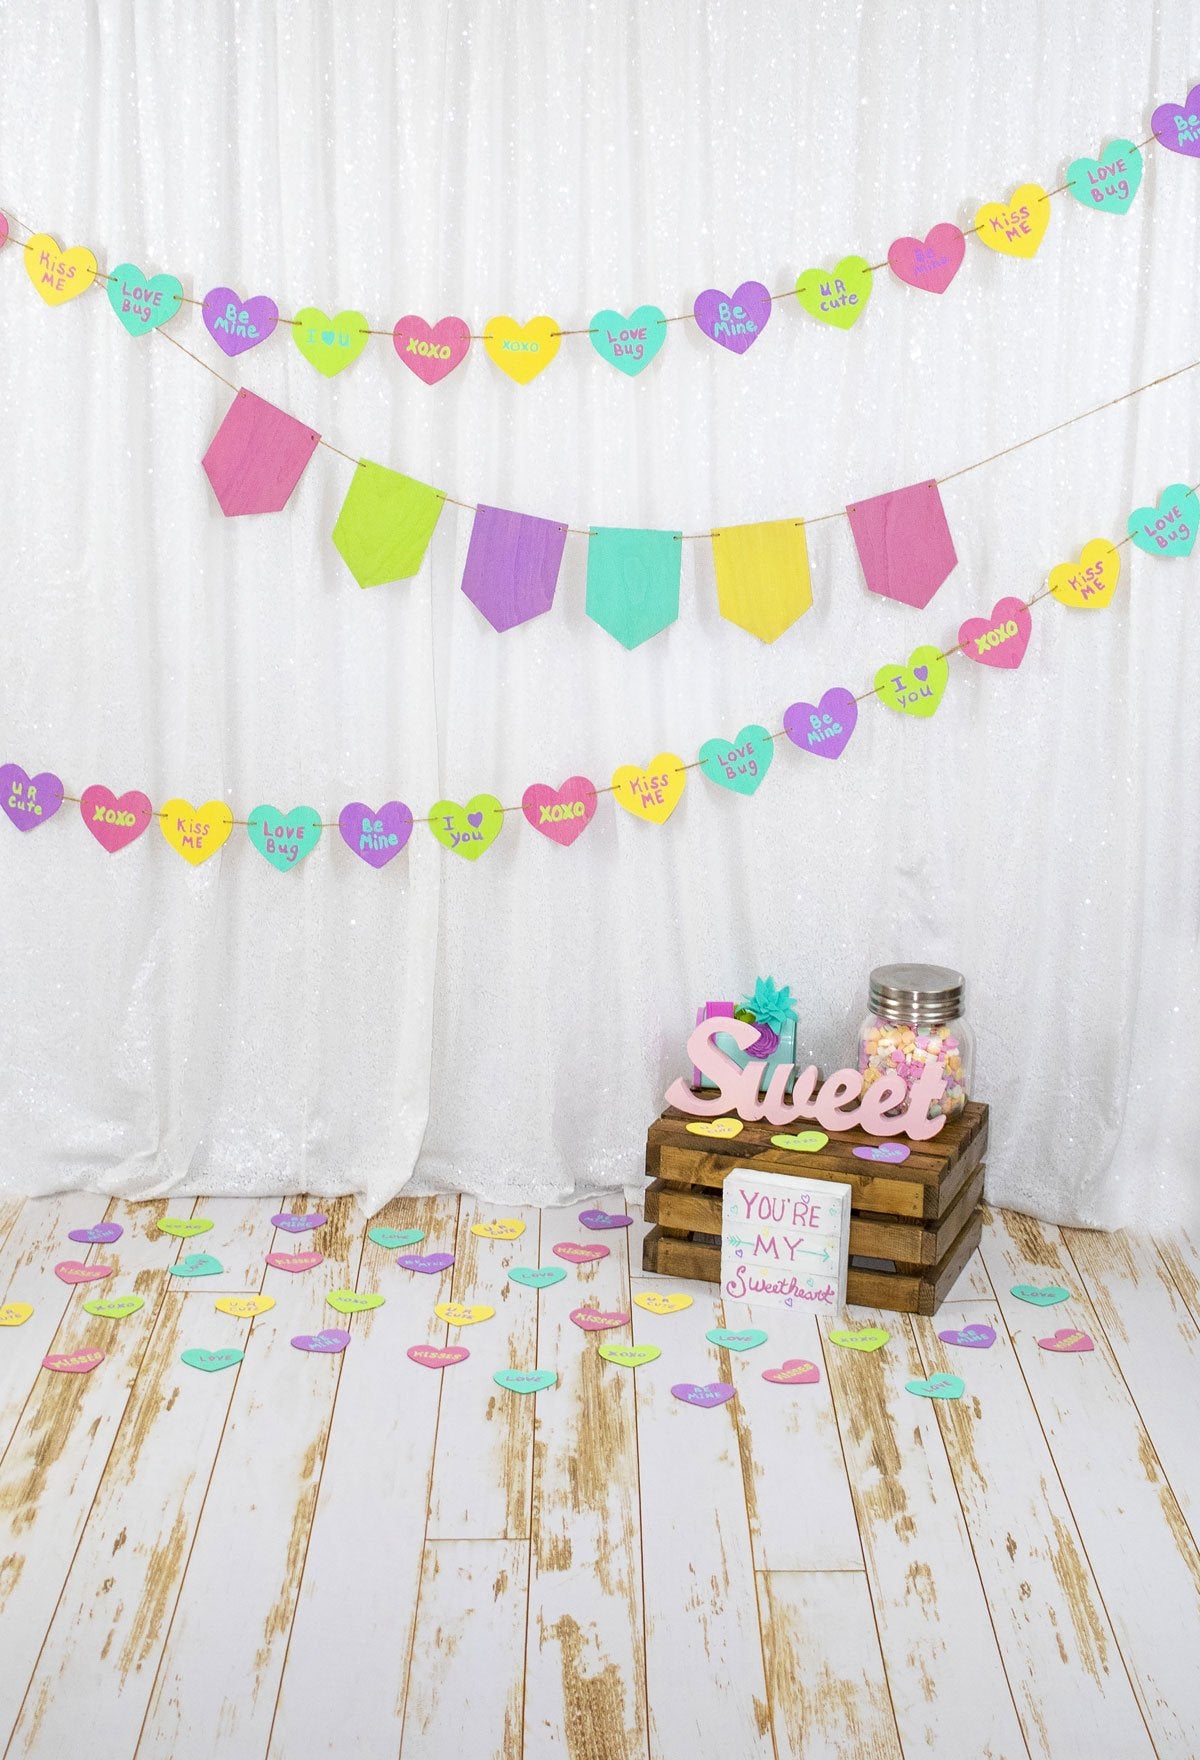 Kate White Curtain with Retro Decoration Colored Banners Valentine's Day Backdrop Designed by Leann West